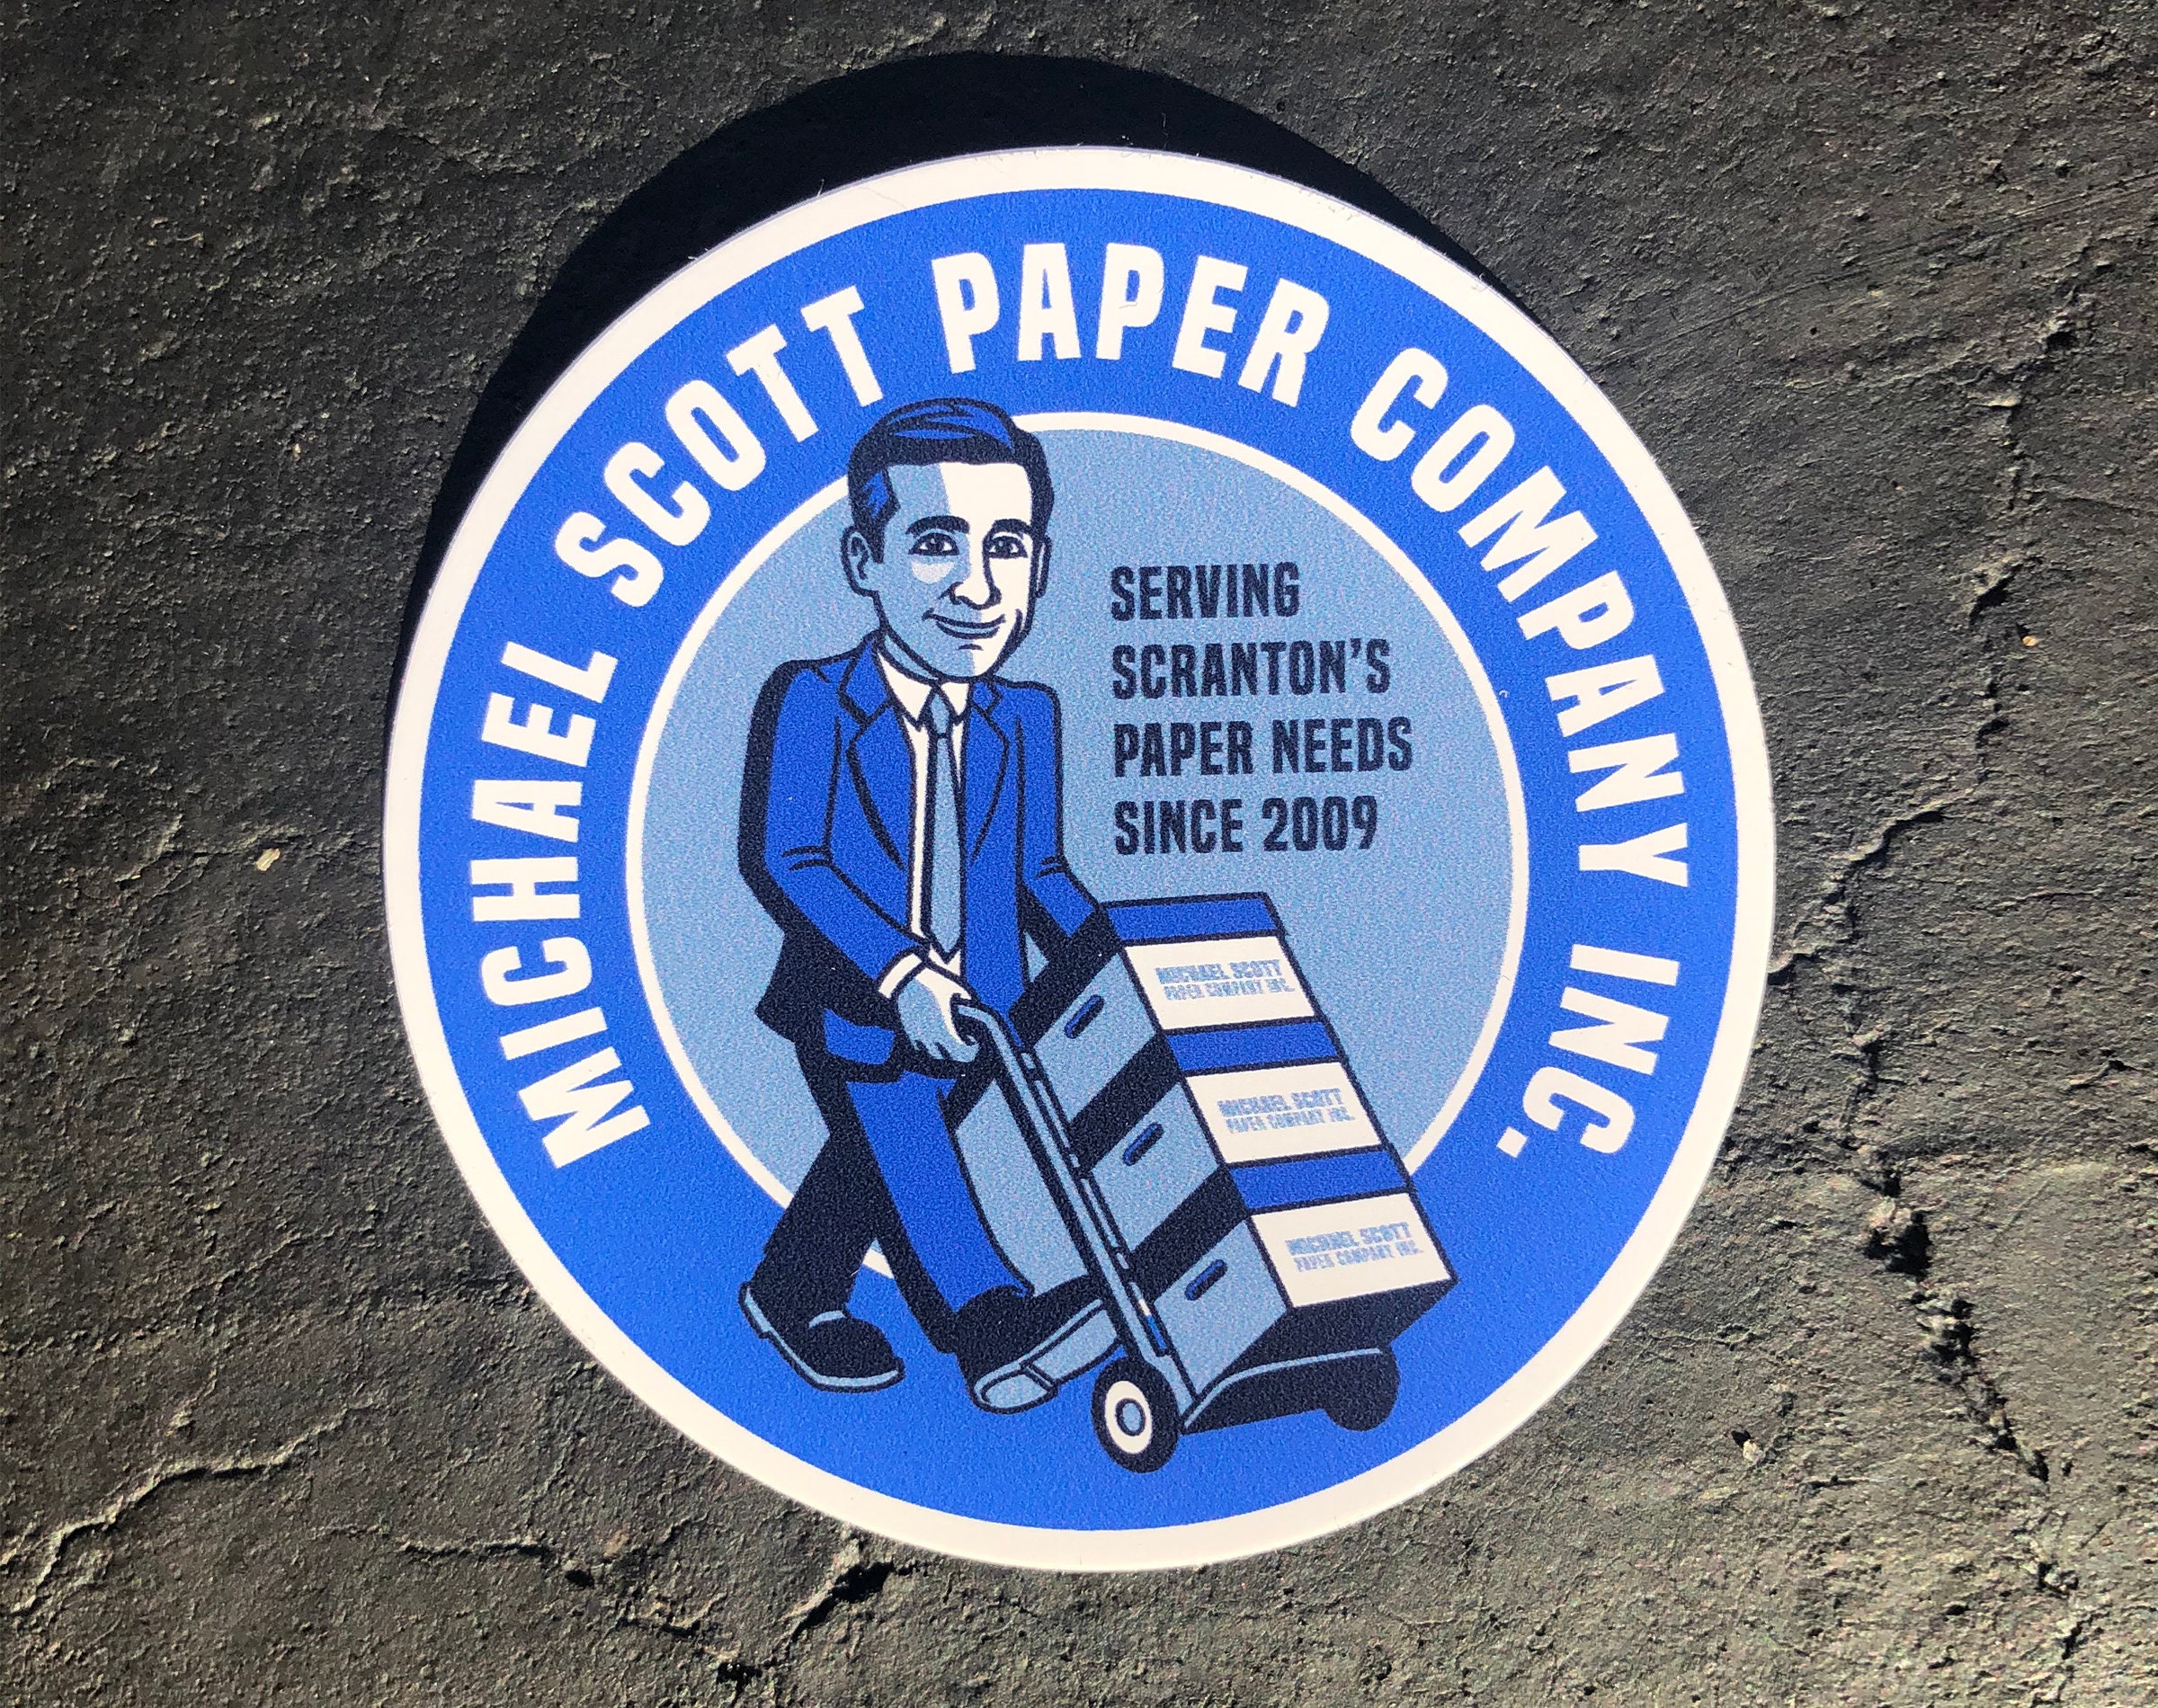  Black Dunder Mifflin Paper Company Logo Sticker (The Office  Funny tv Show) : Sports & Outdoors